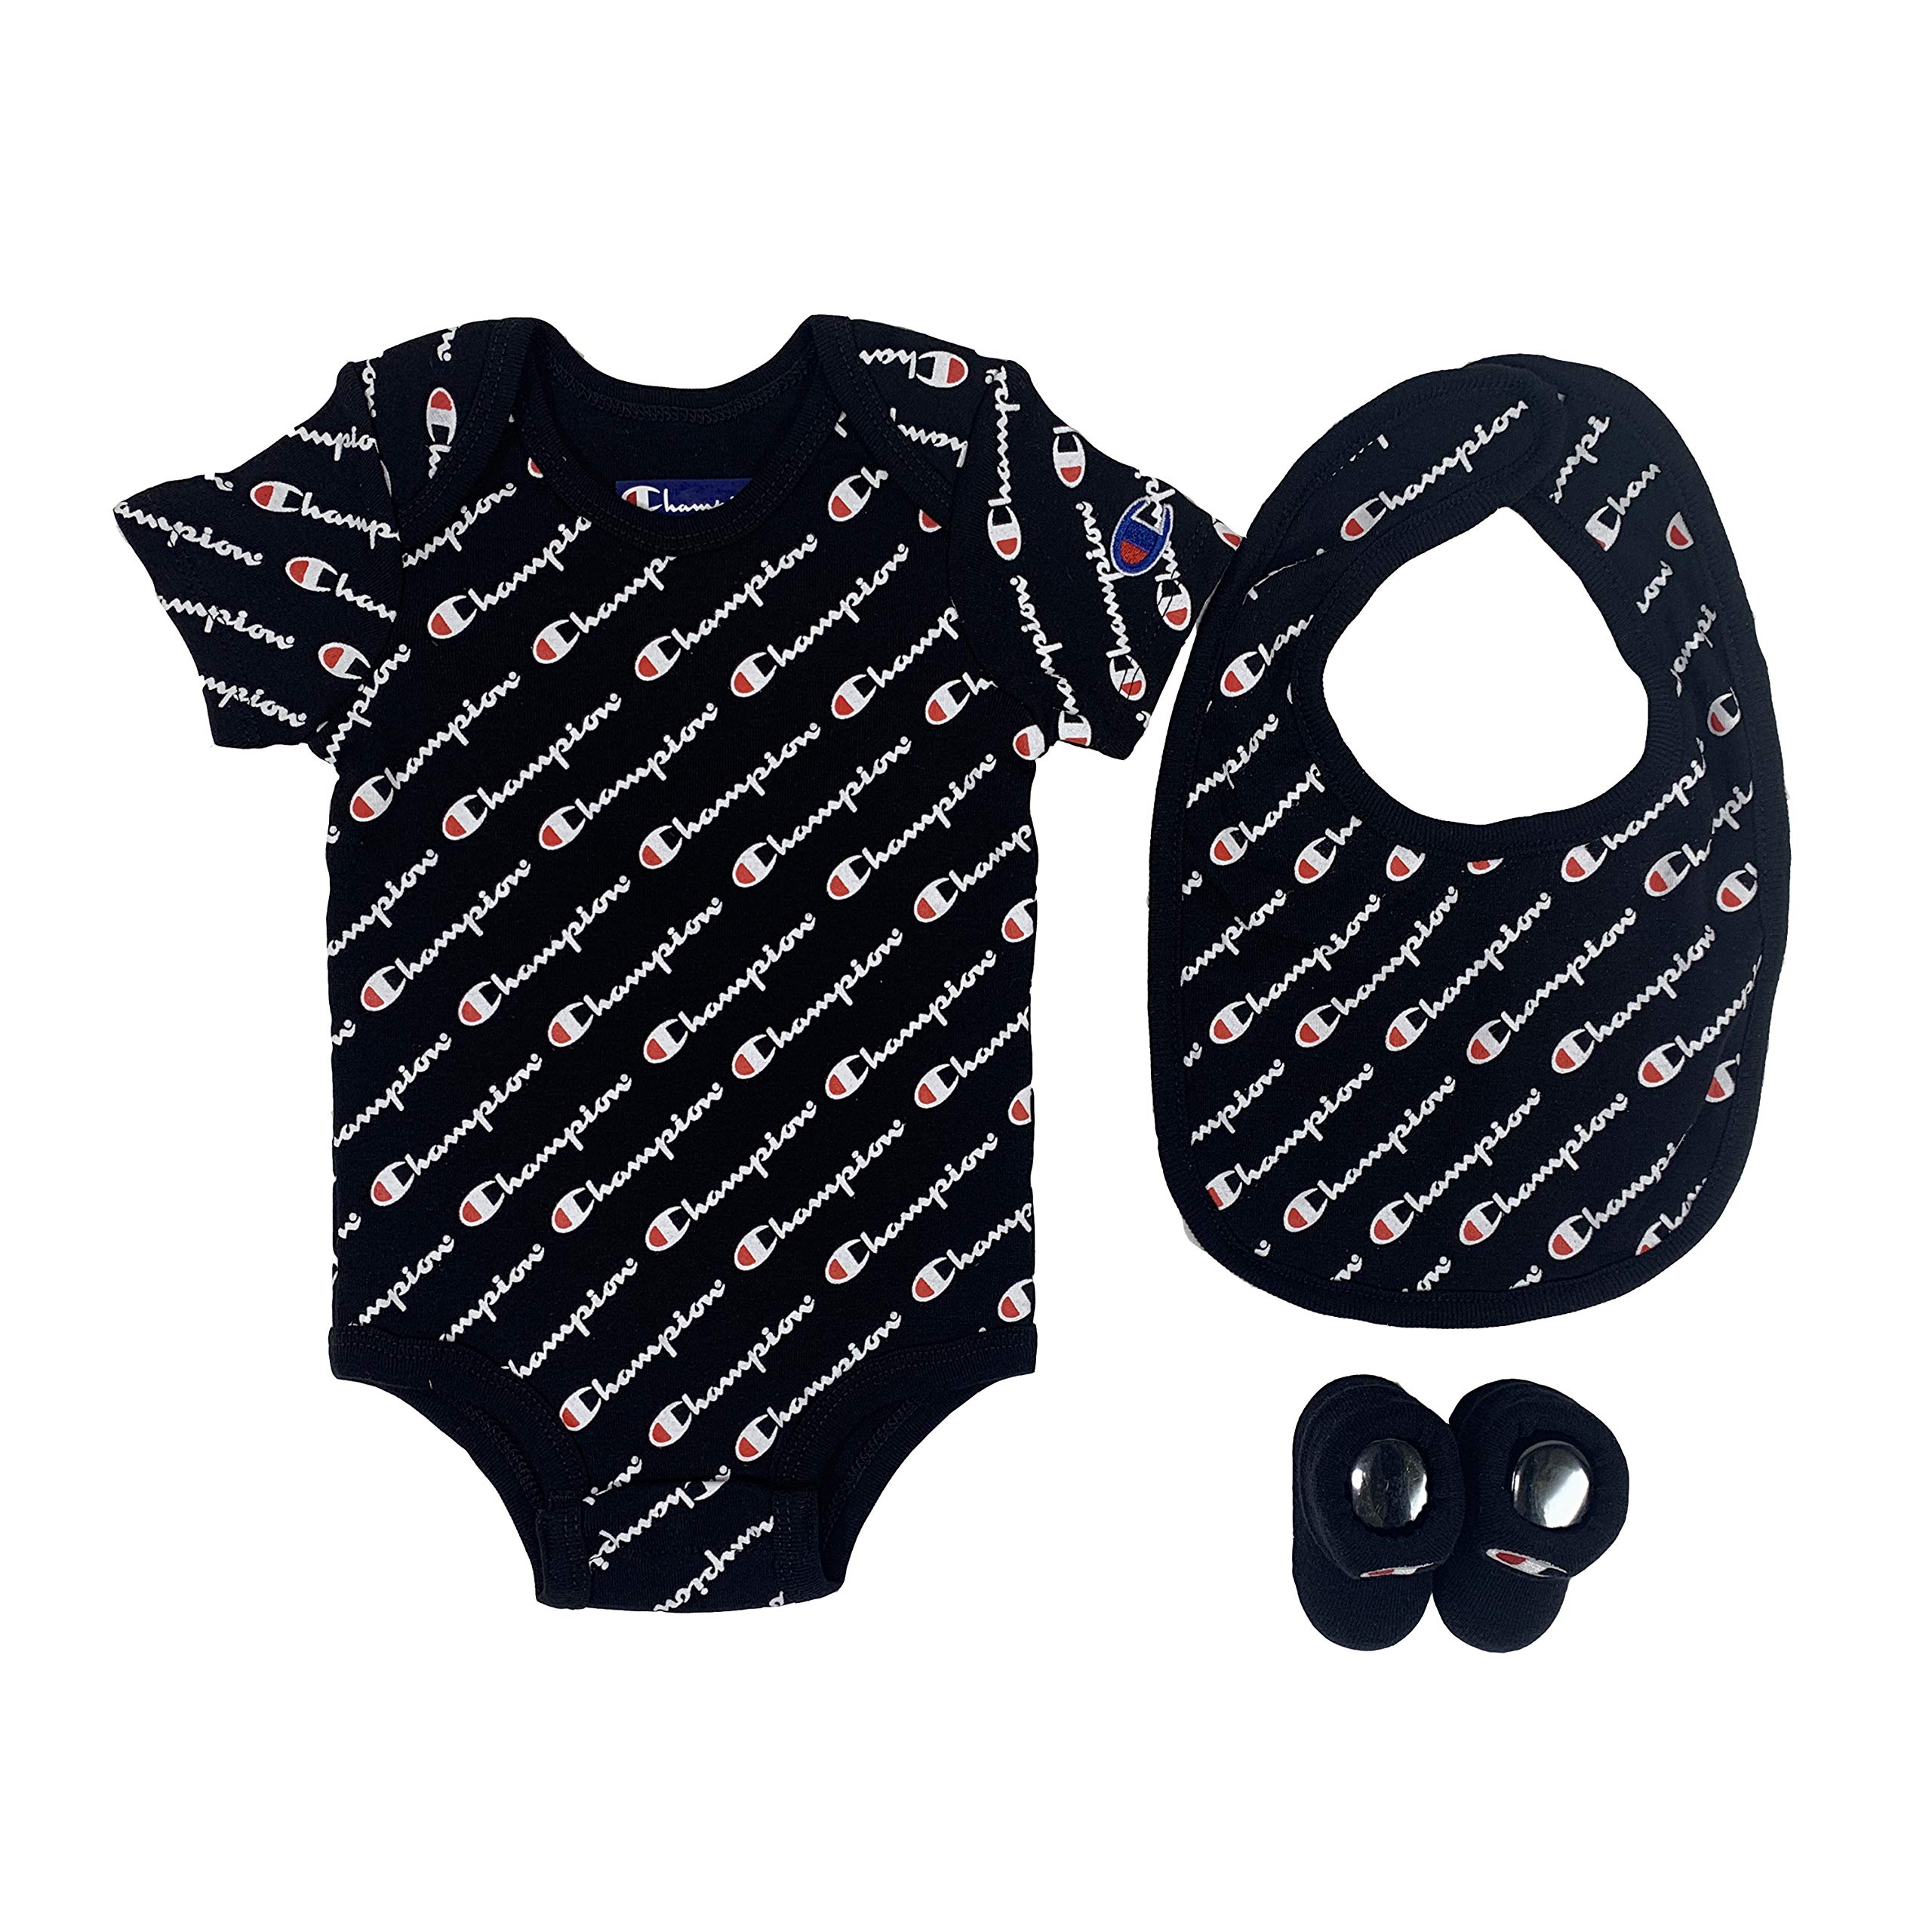 Champion baby-girls unisex-baby Champion All-over-print Infant 3-pc Box Includes a Body Suit, a Bib Or Hat and Pair of Booties in Multiple Colors